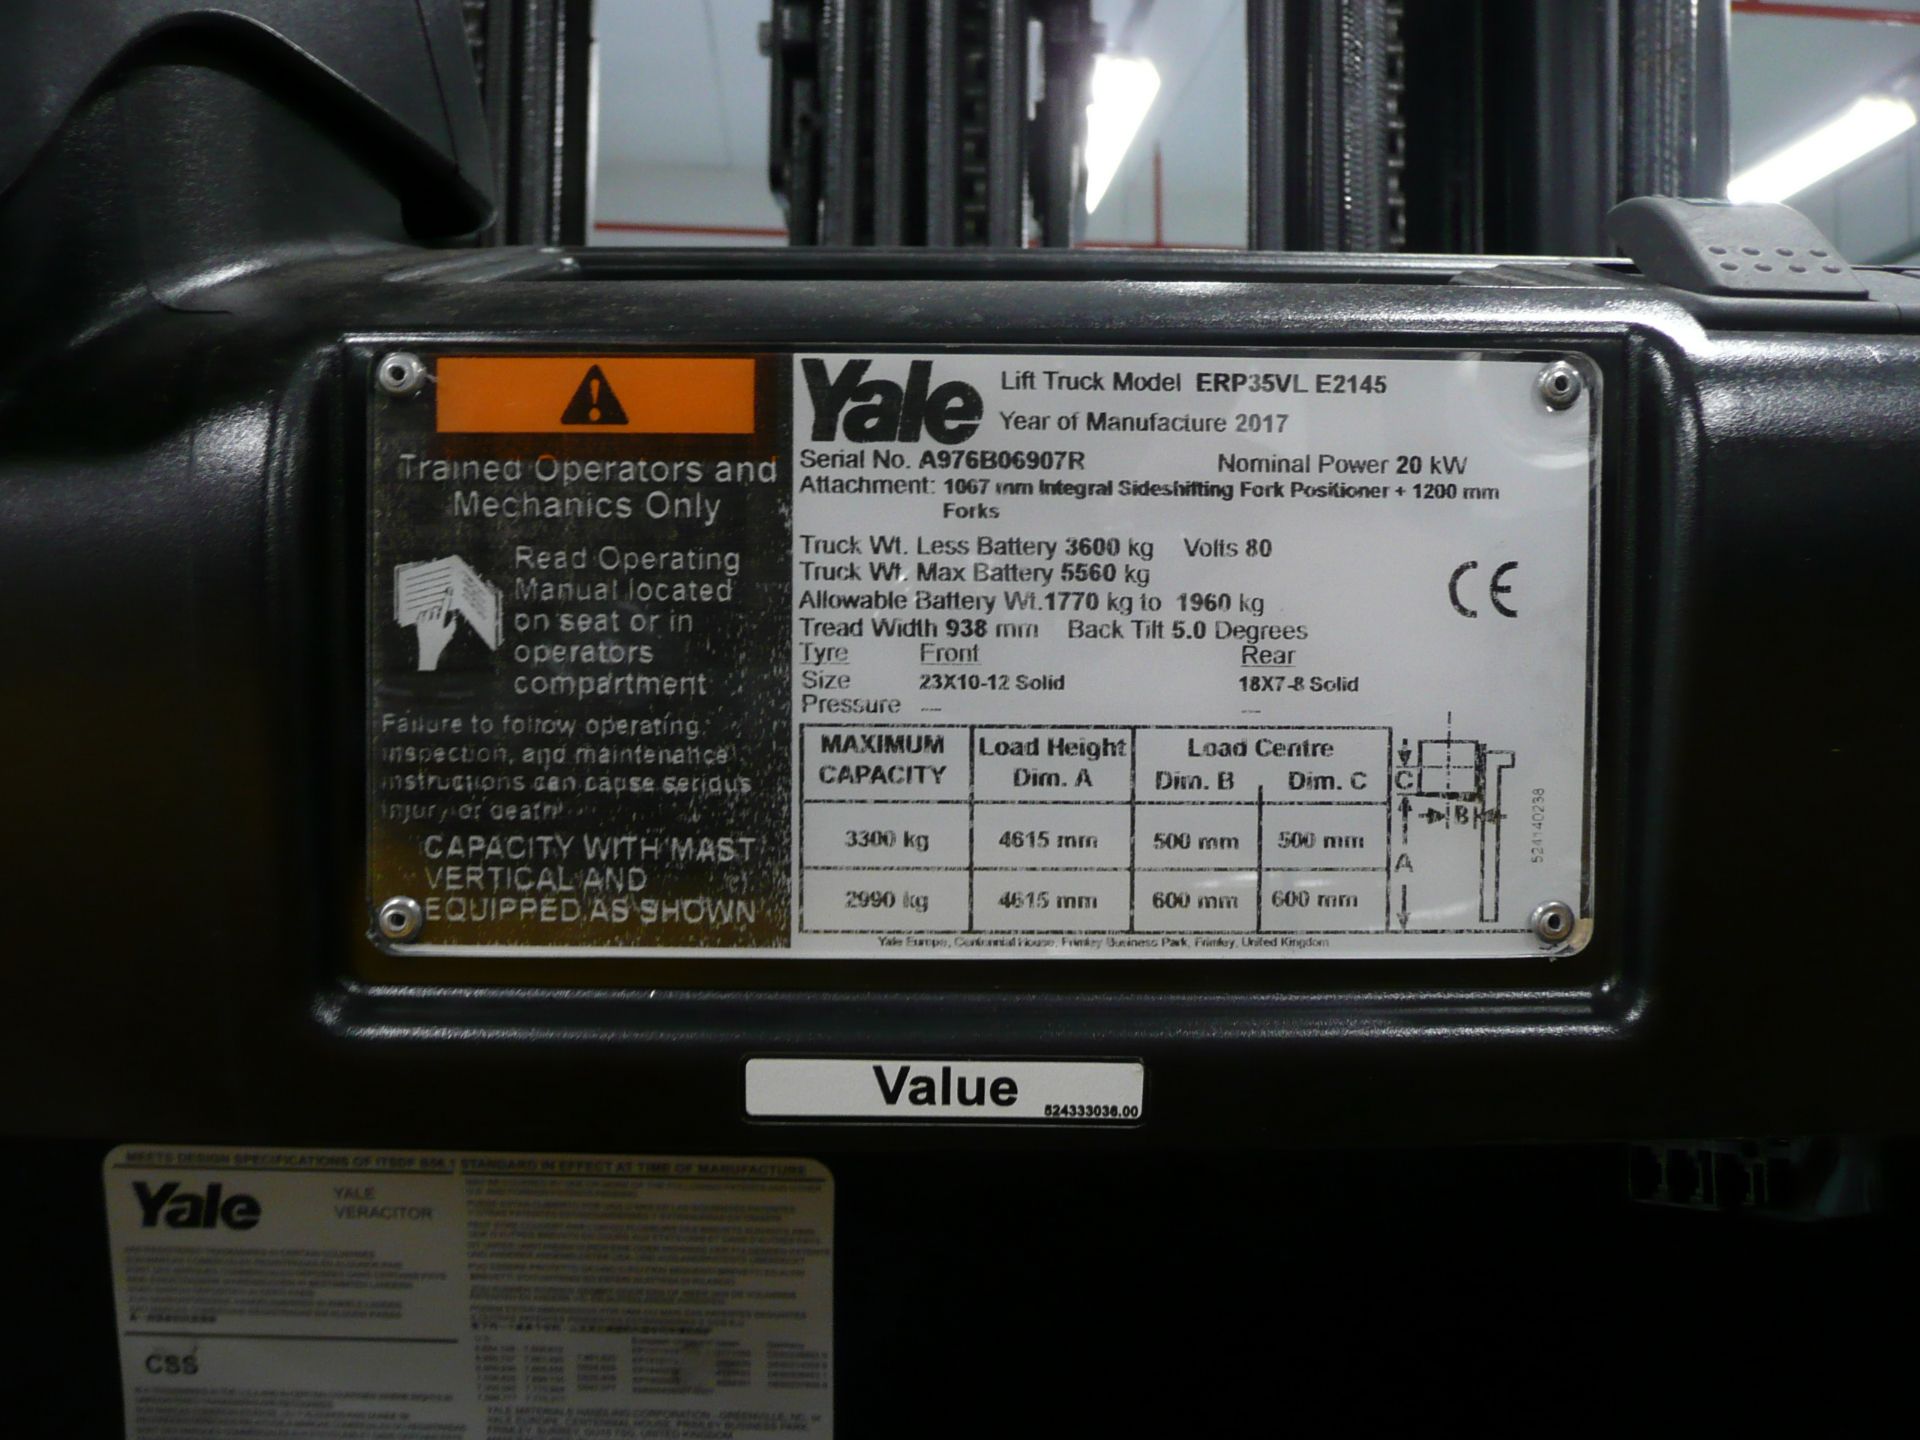 Yale, ERP35VL E2145, electric forklift truck with side shift, 3.3T Capacity, ****ONLY 45 HOURS**** - Image 3 of 6